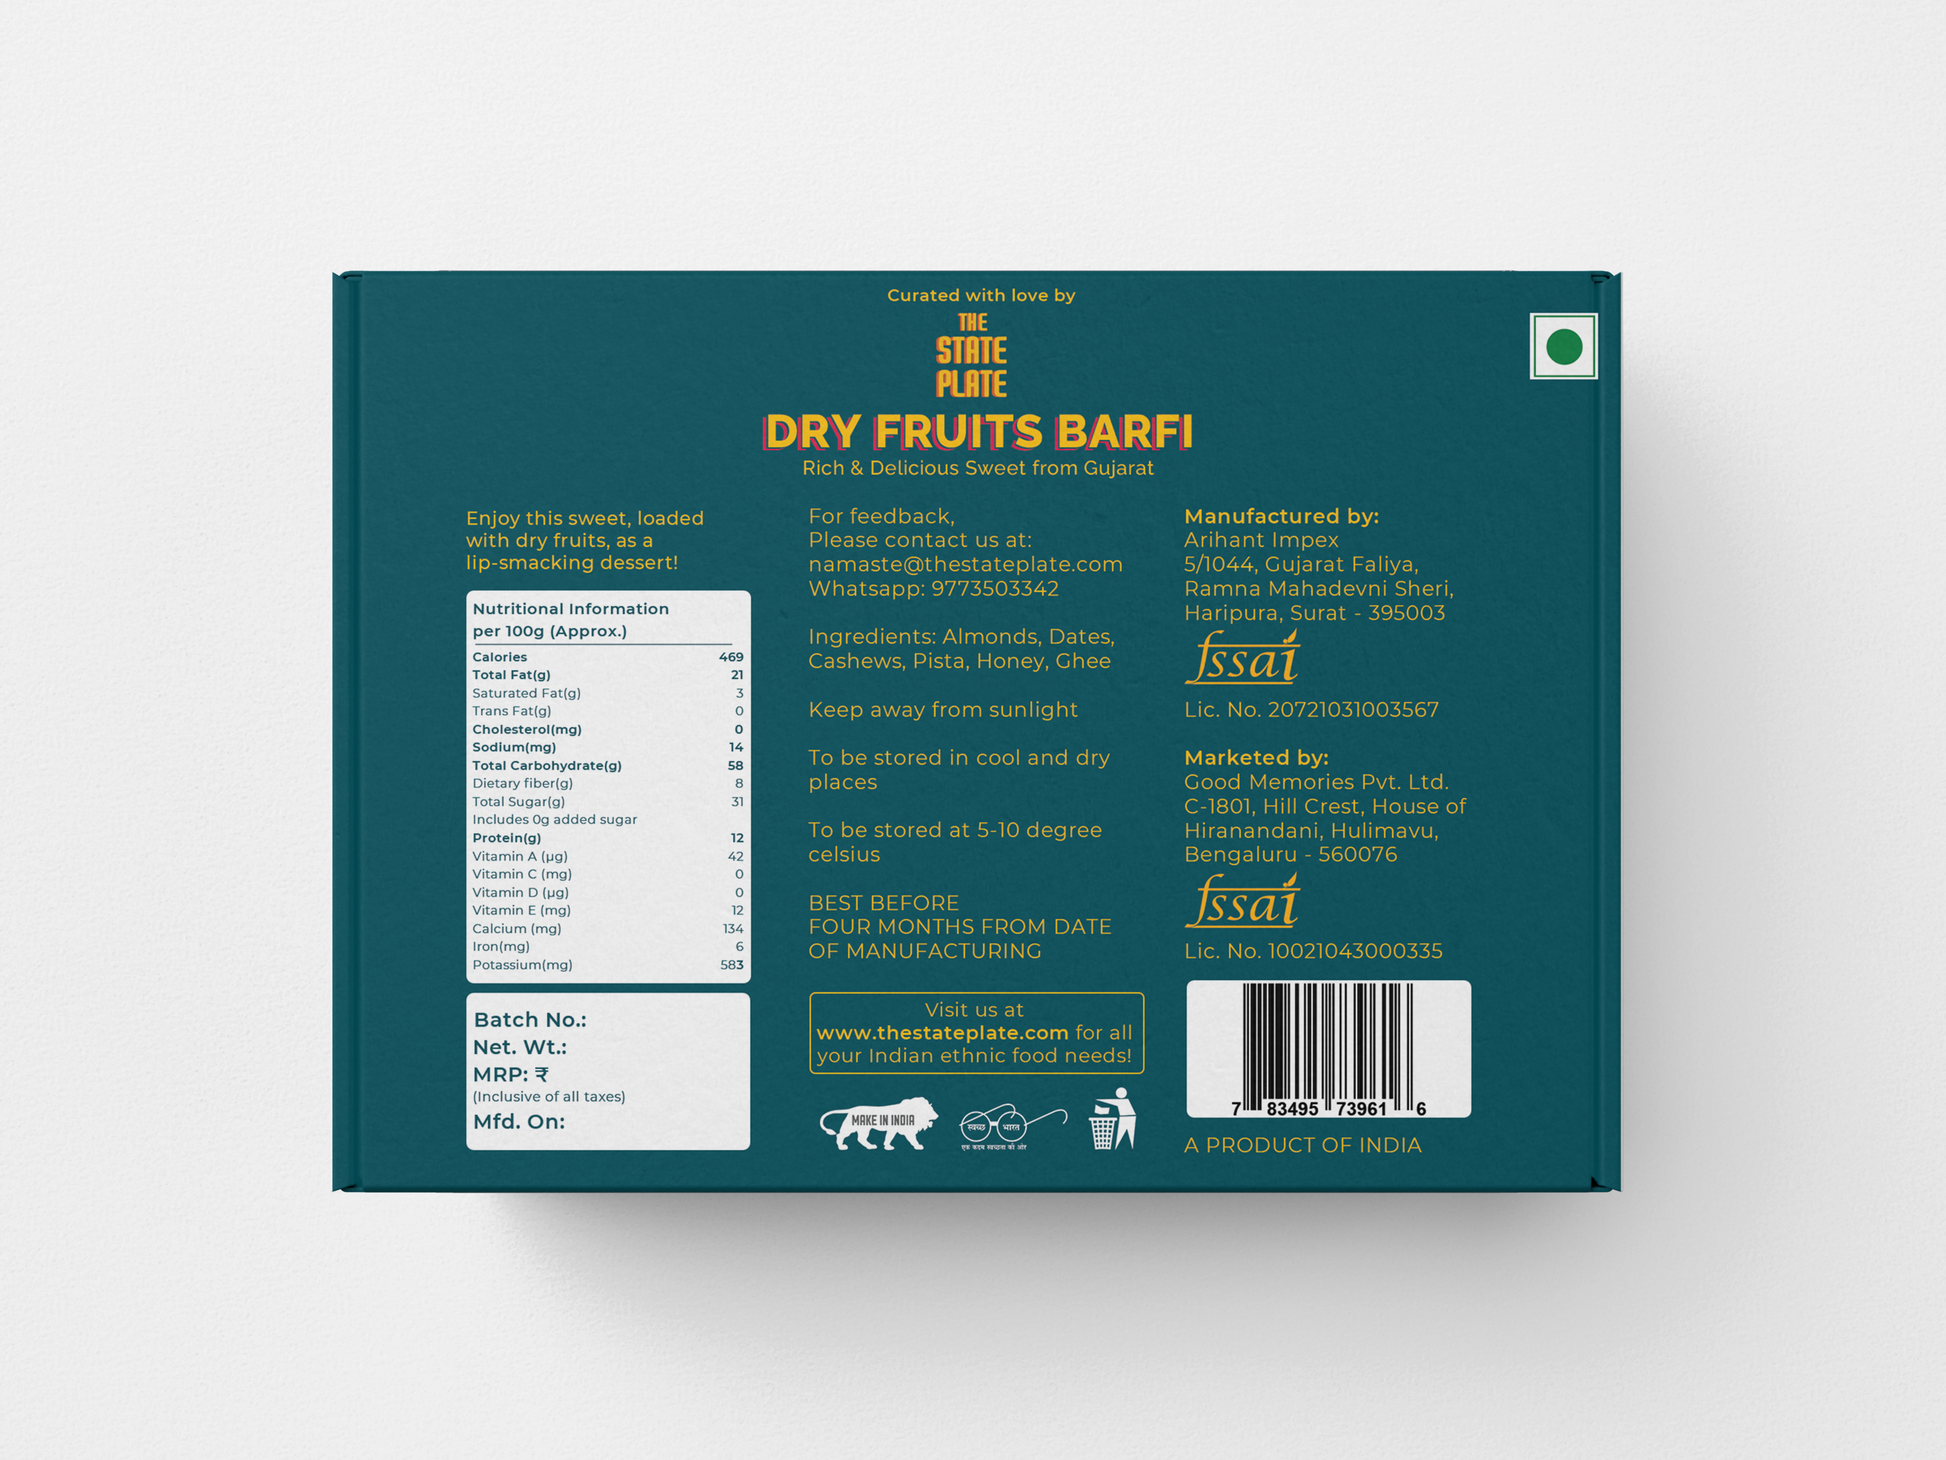 Shop Gujarat's Famous Dry Fruits Barfi 250 gms online at best prices on The State Plate